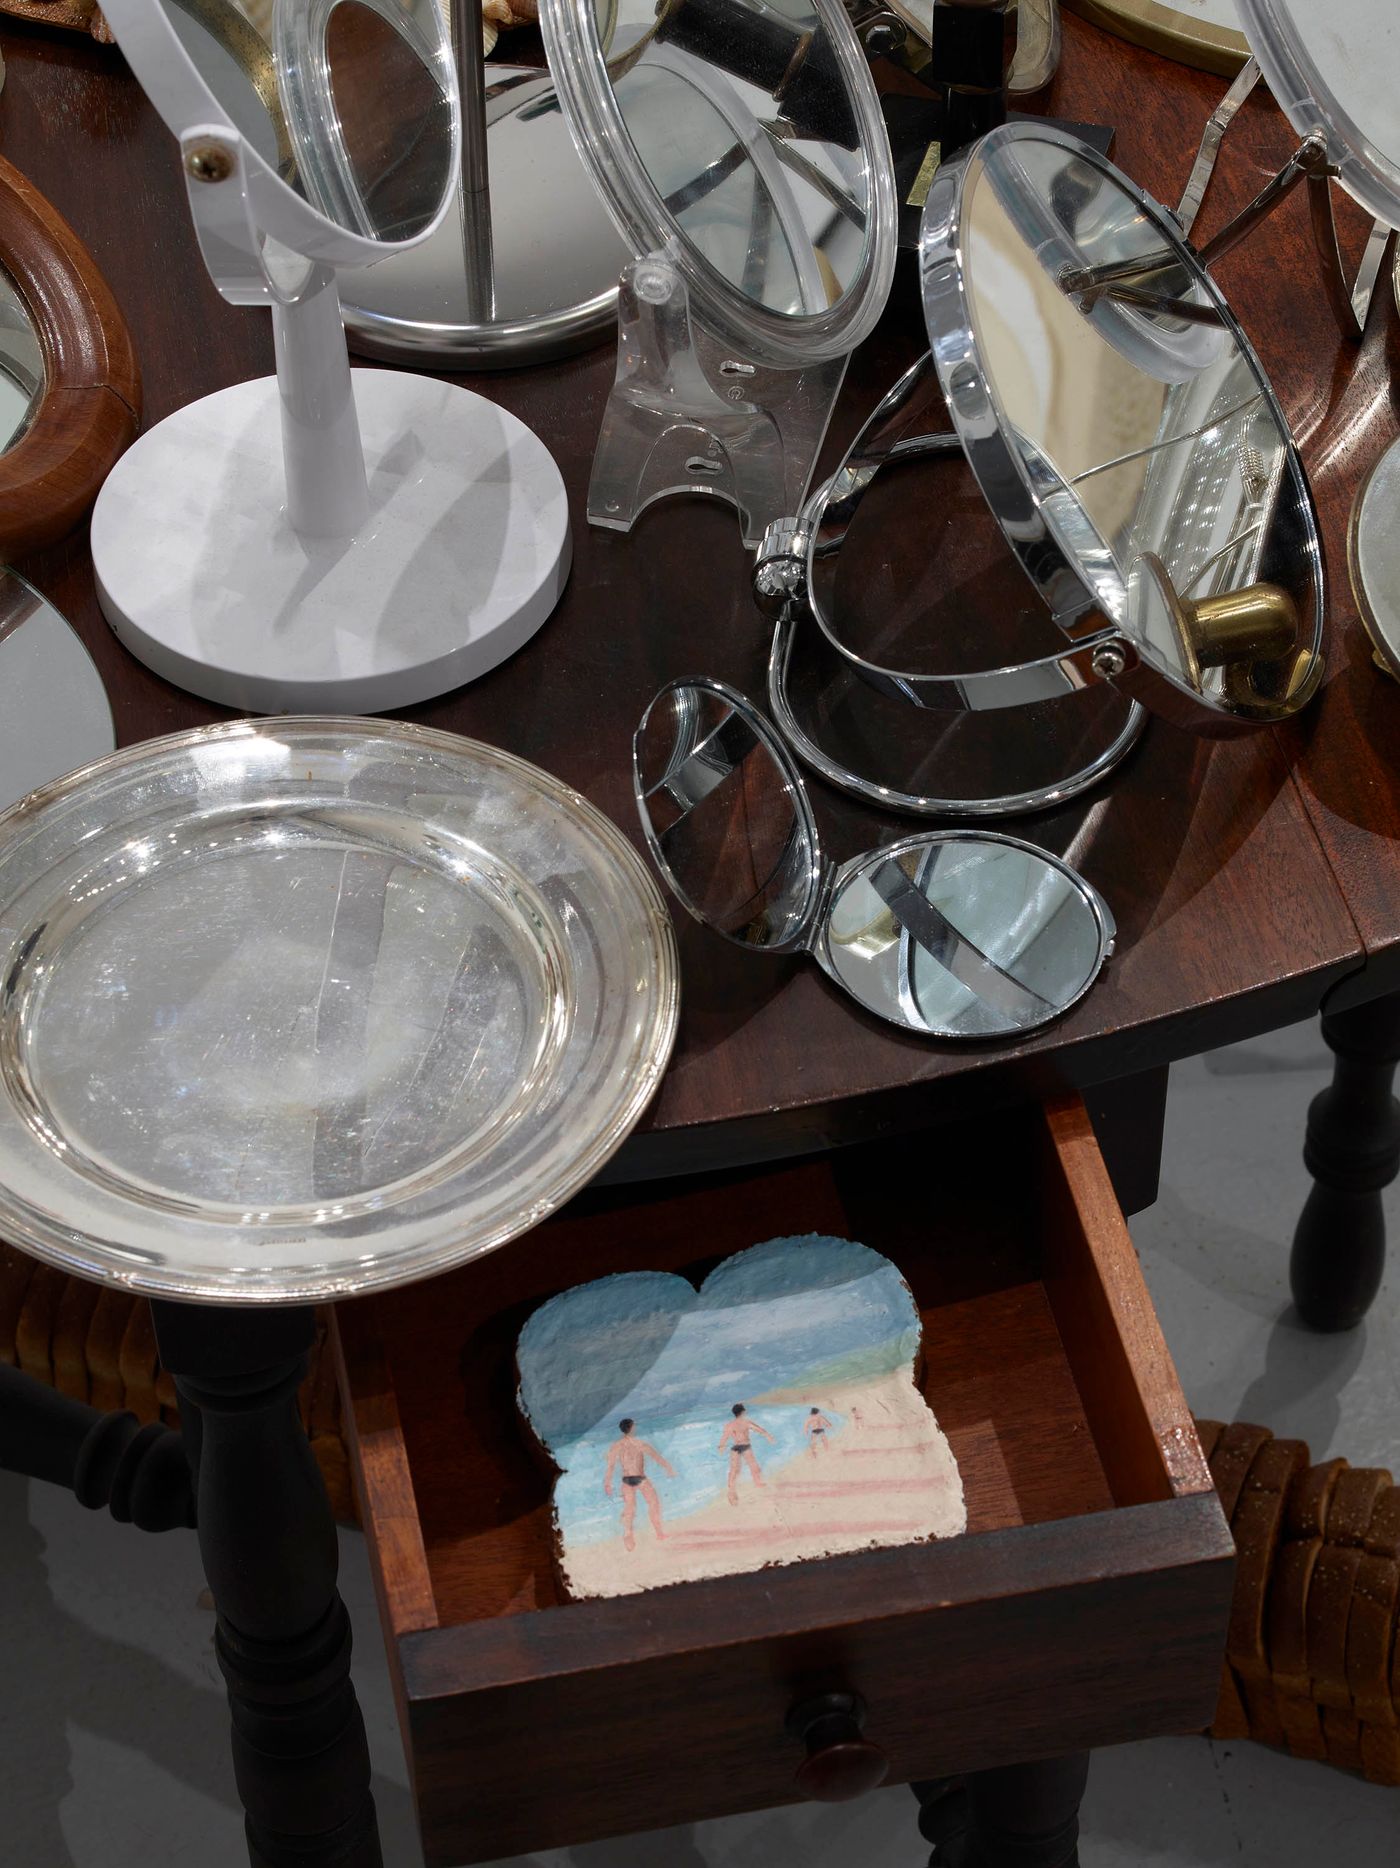 Incarnations (detail), 2022. Mirrors, silver plates, table, oil on toast in drawer. Photo: Merik Goma.